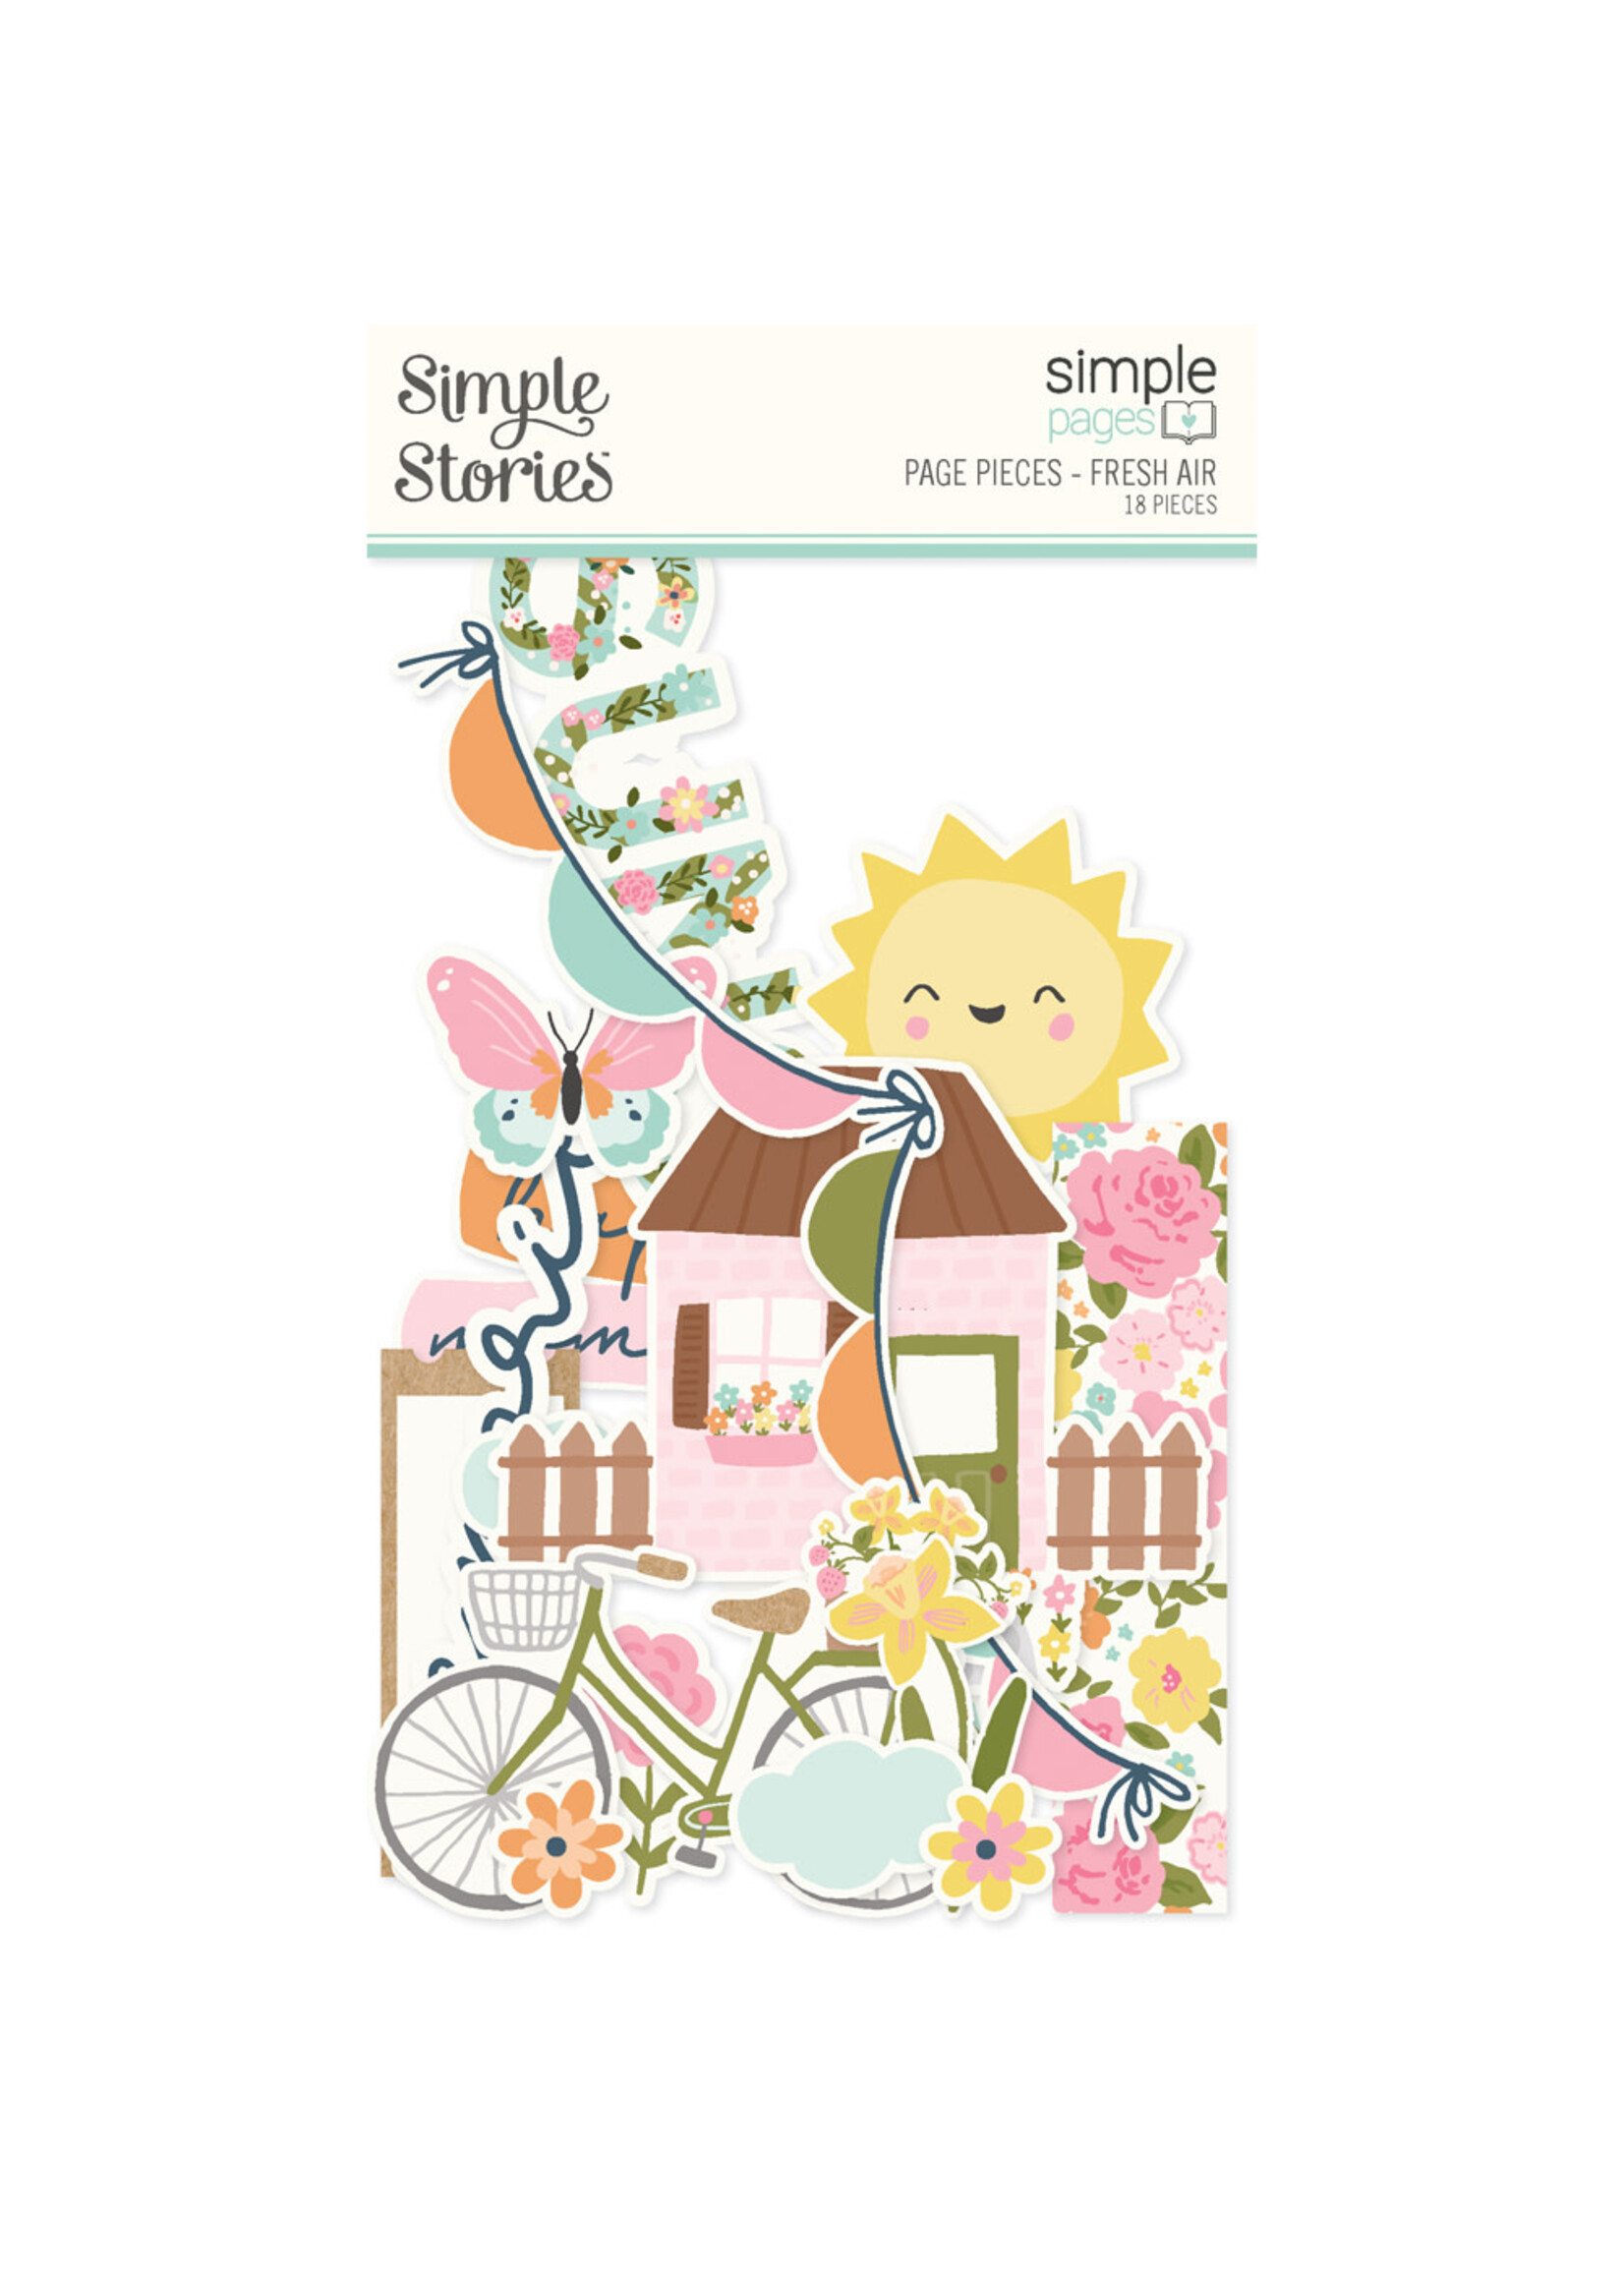 Simple Stories Fresh Air - Simple Pages Page Pieces